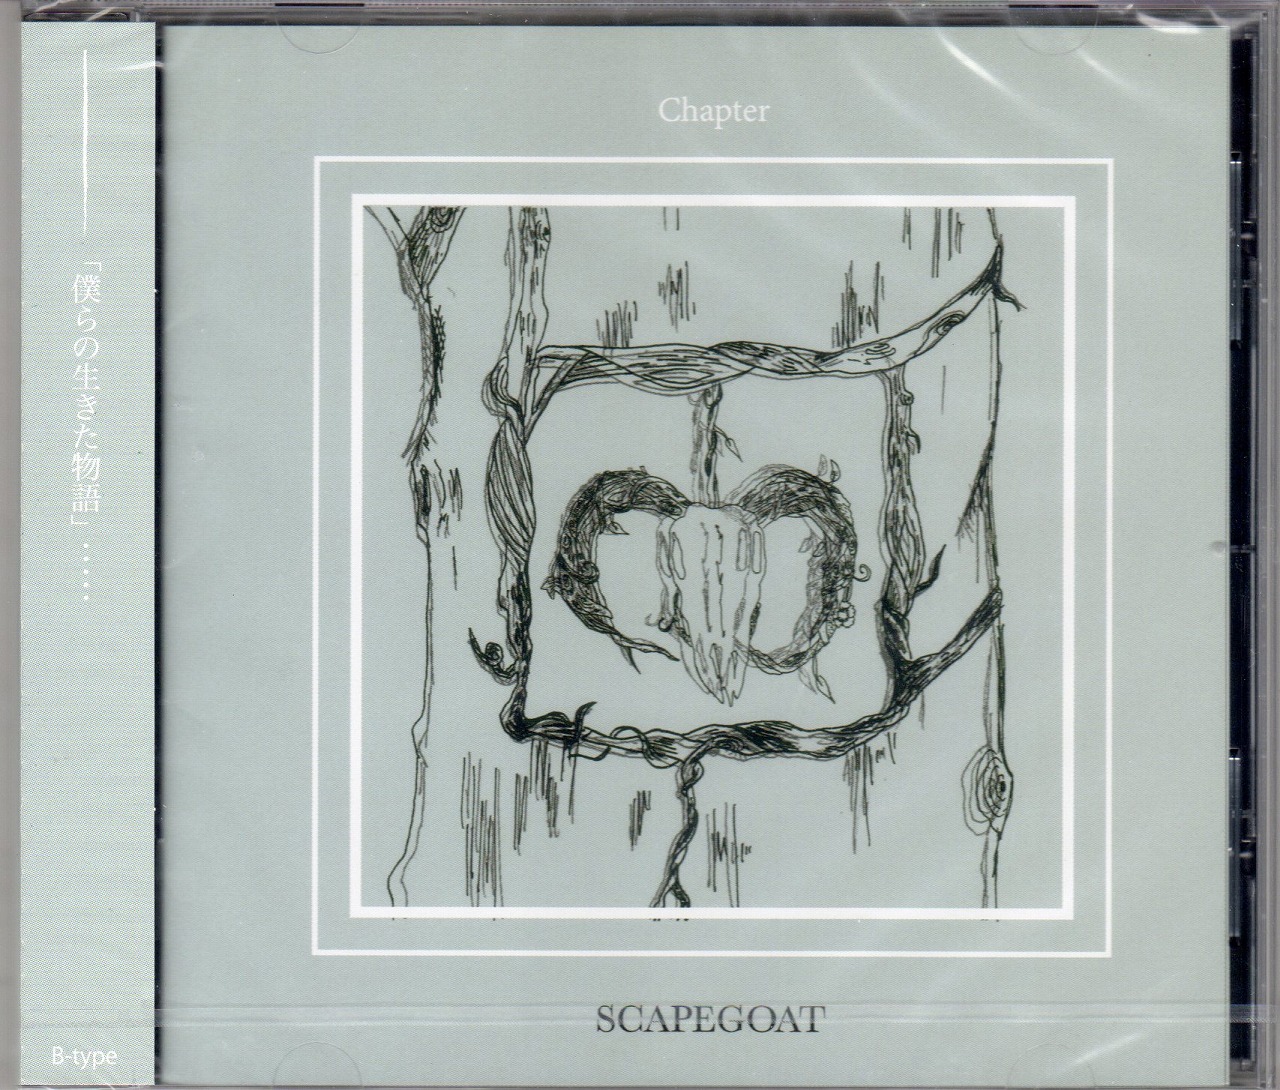 SCAPEGOAT の CD 【B type】Chapter